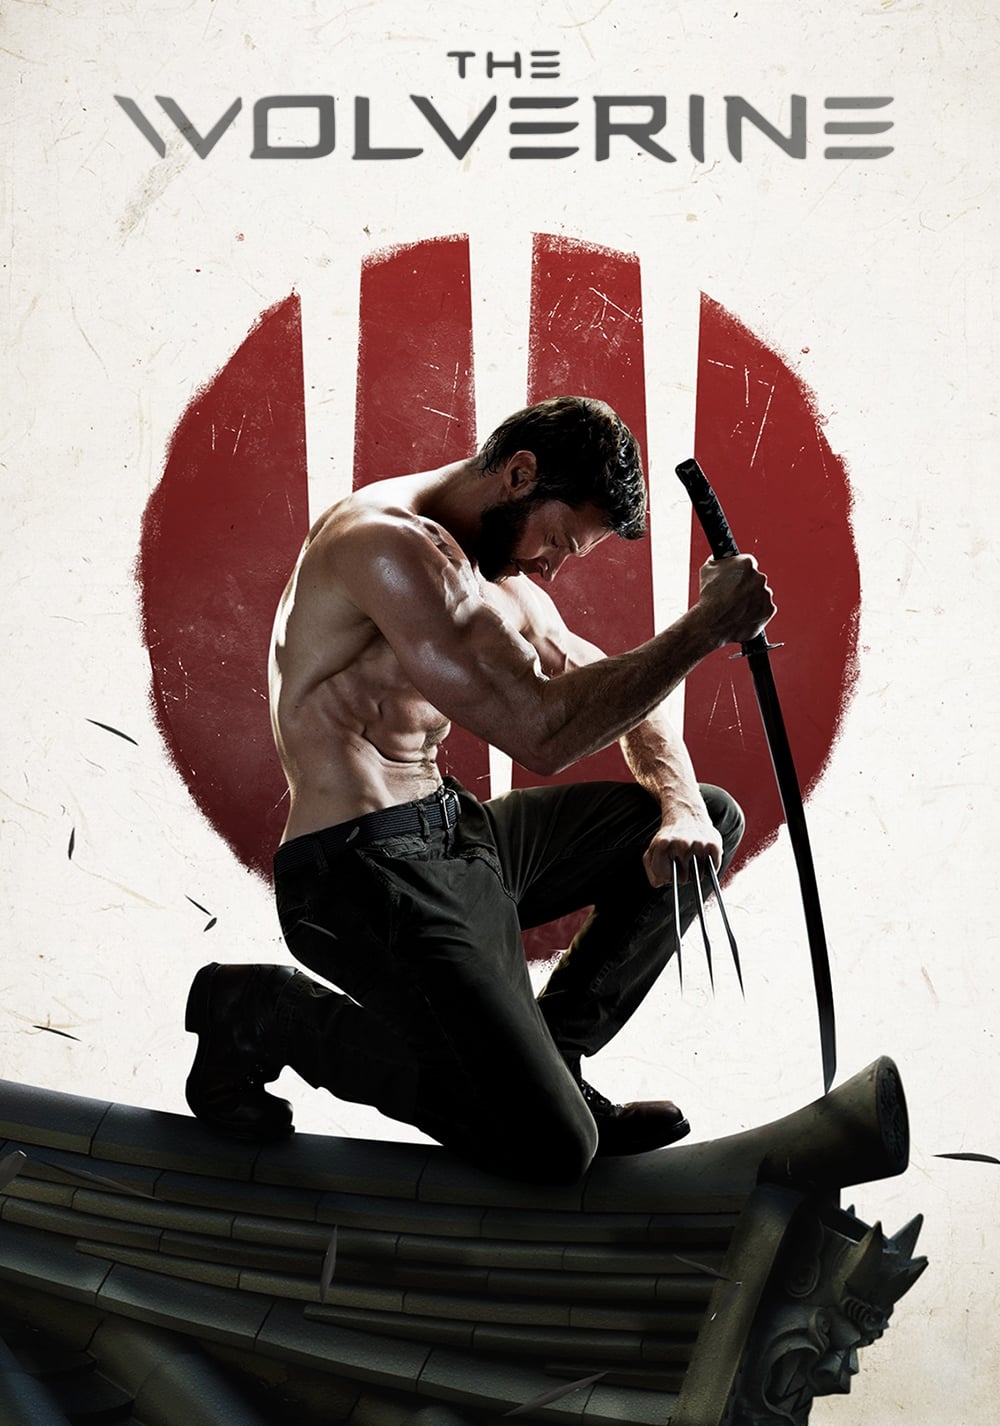 The Wolverine Background (Poster)